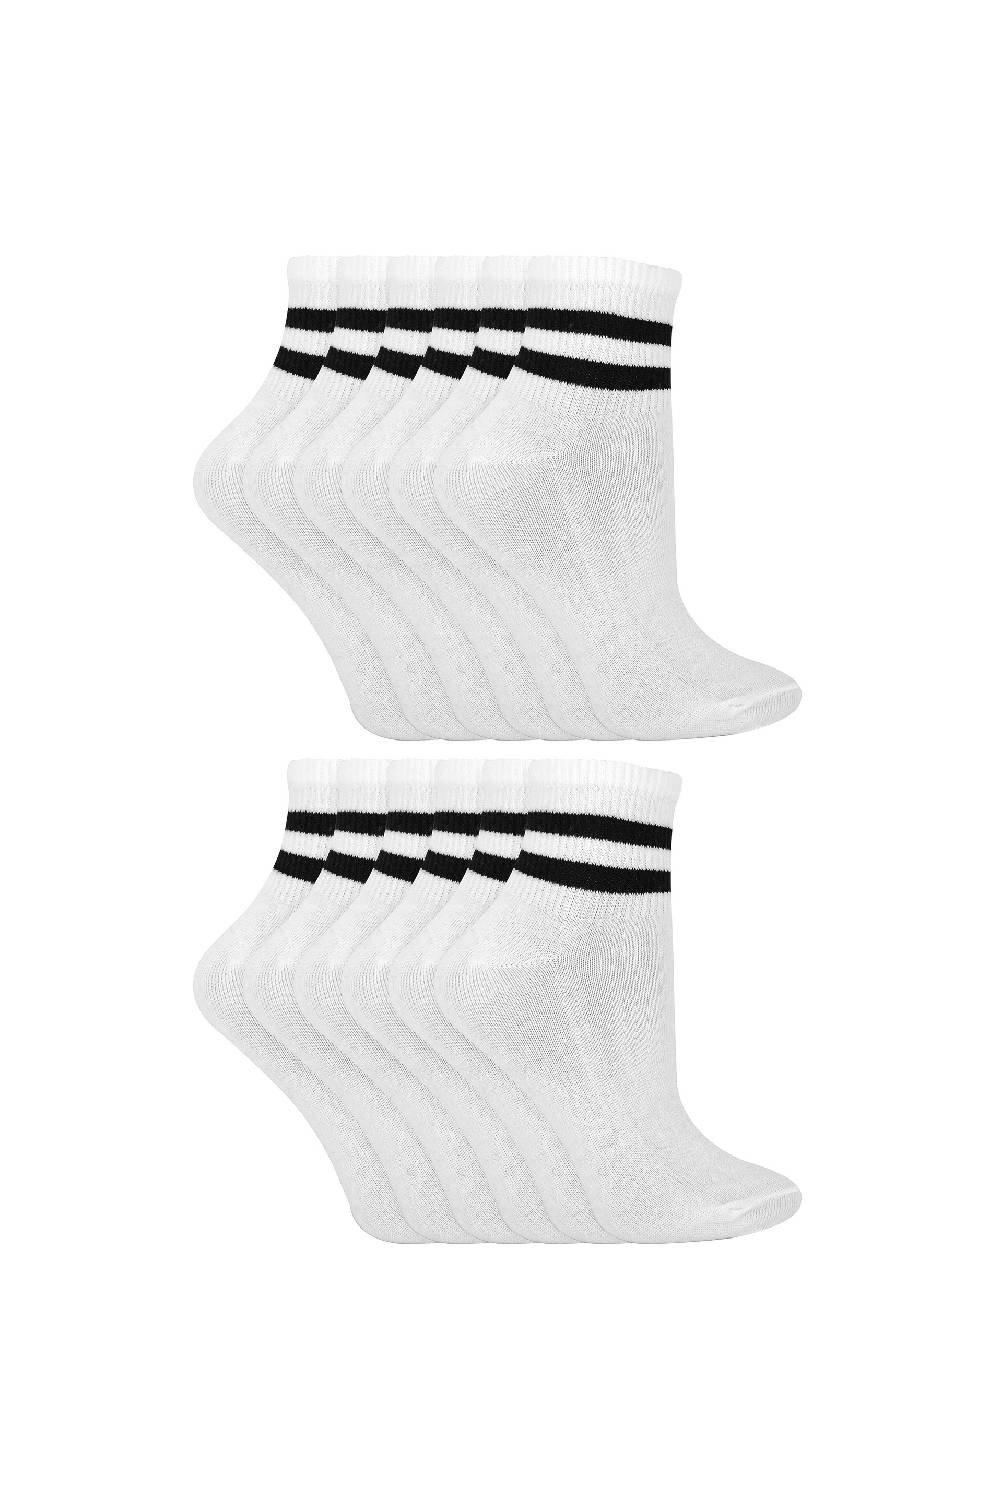 12 Pairs Multipack Ankle Cotton Socks with Stripes